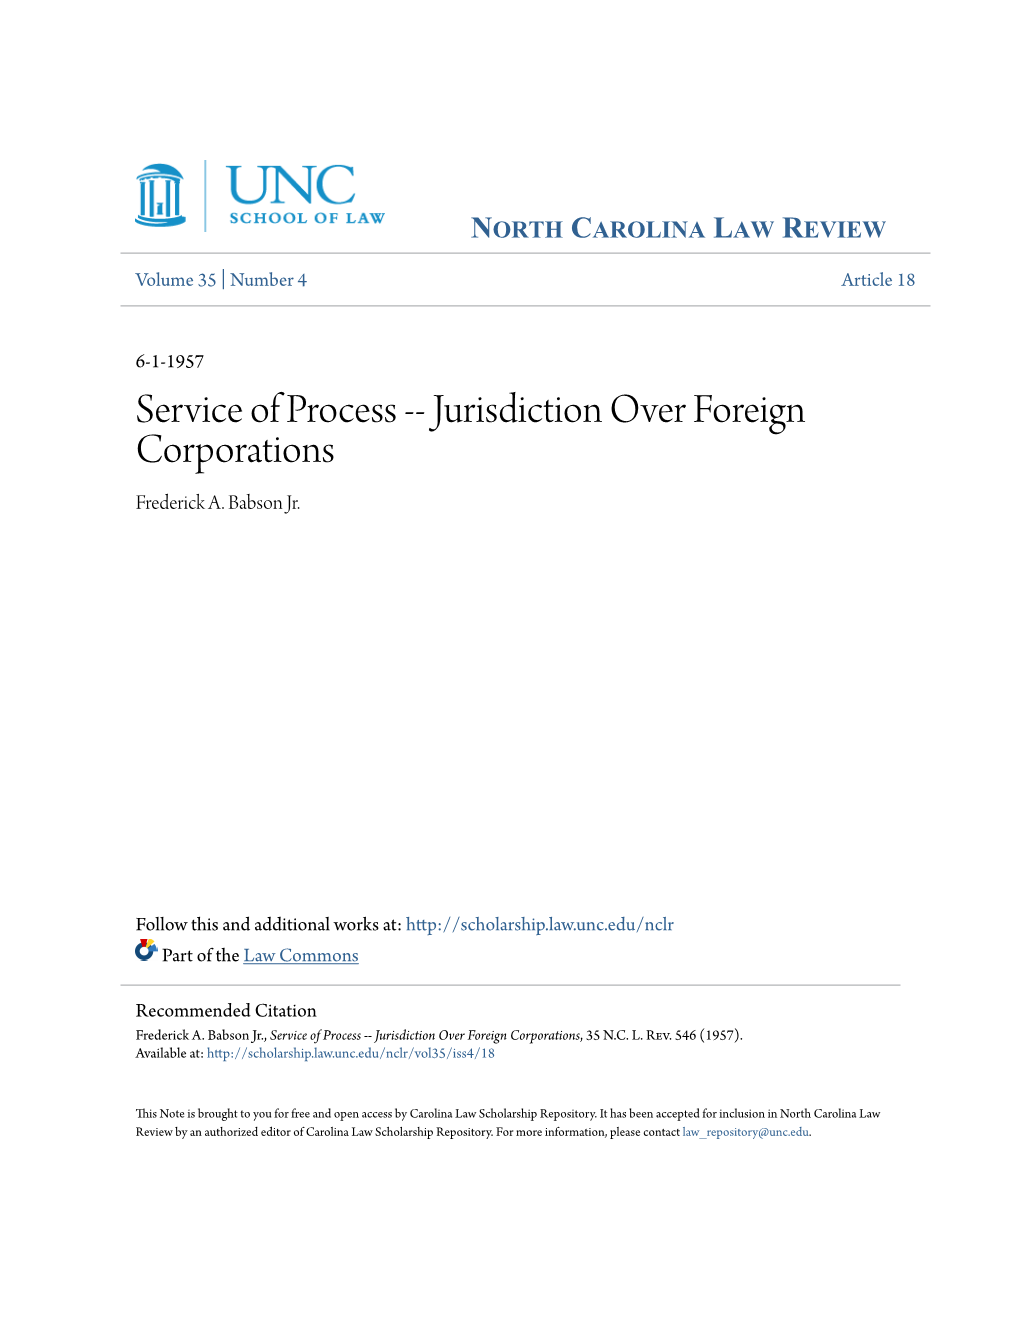 Jurisdiction Over Foreign Corporations Frederick A